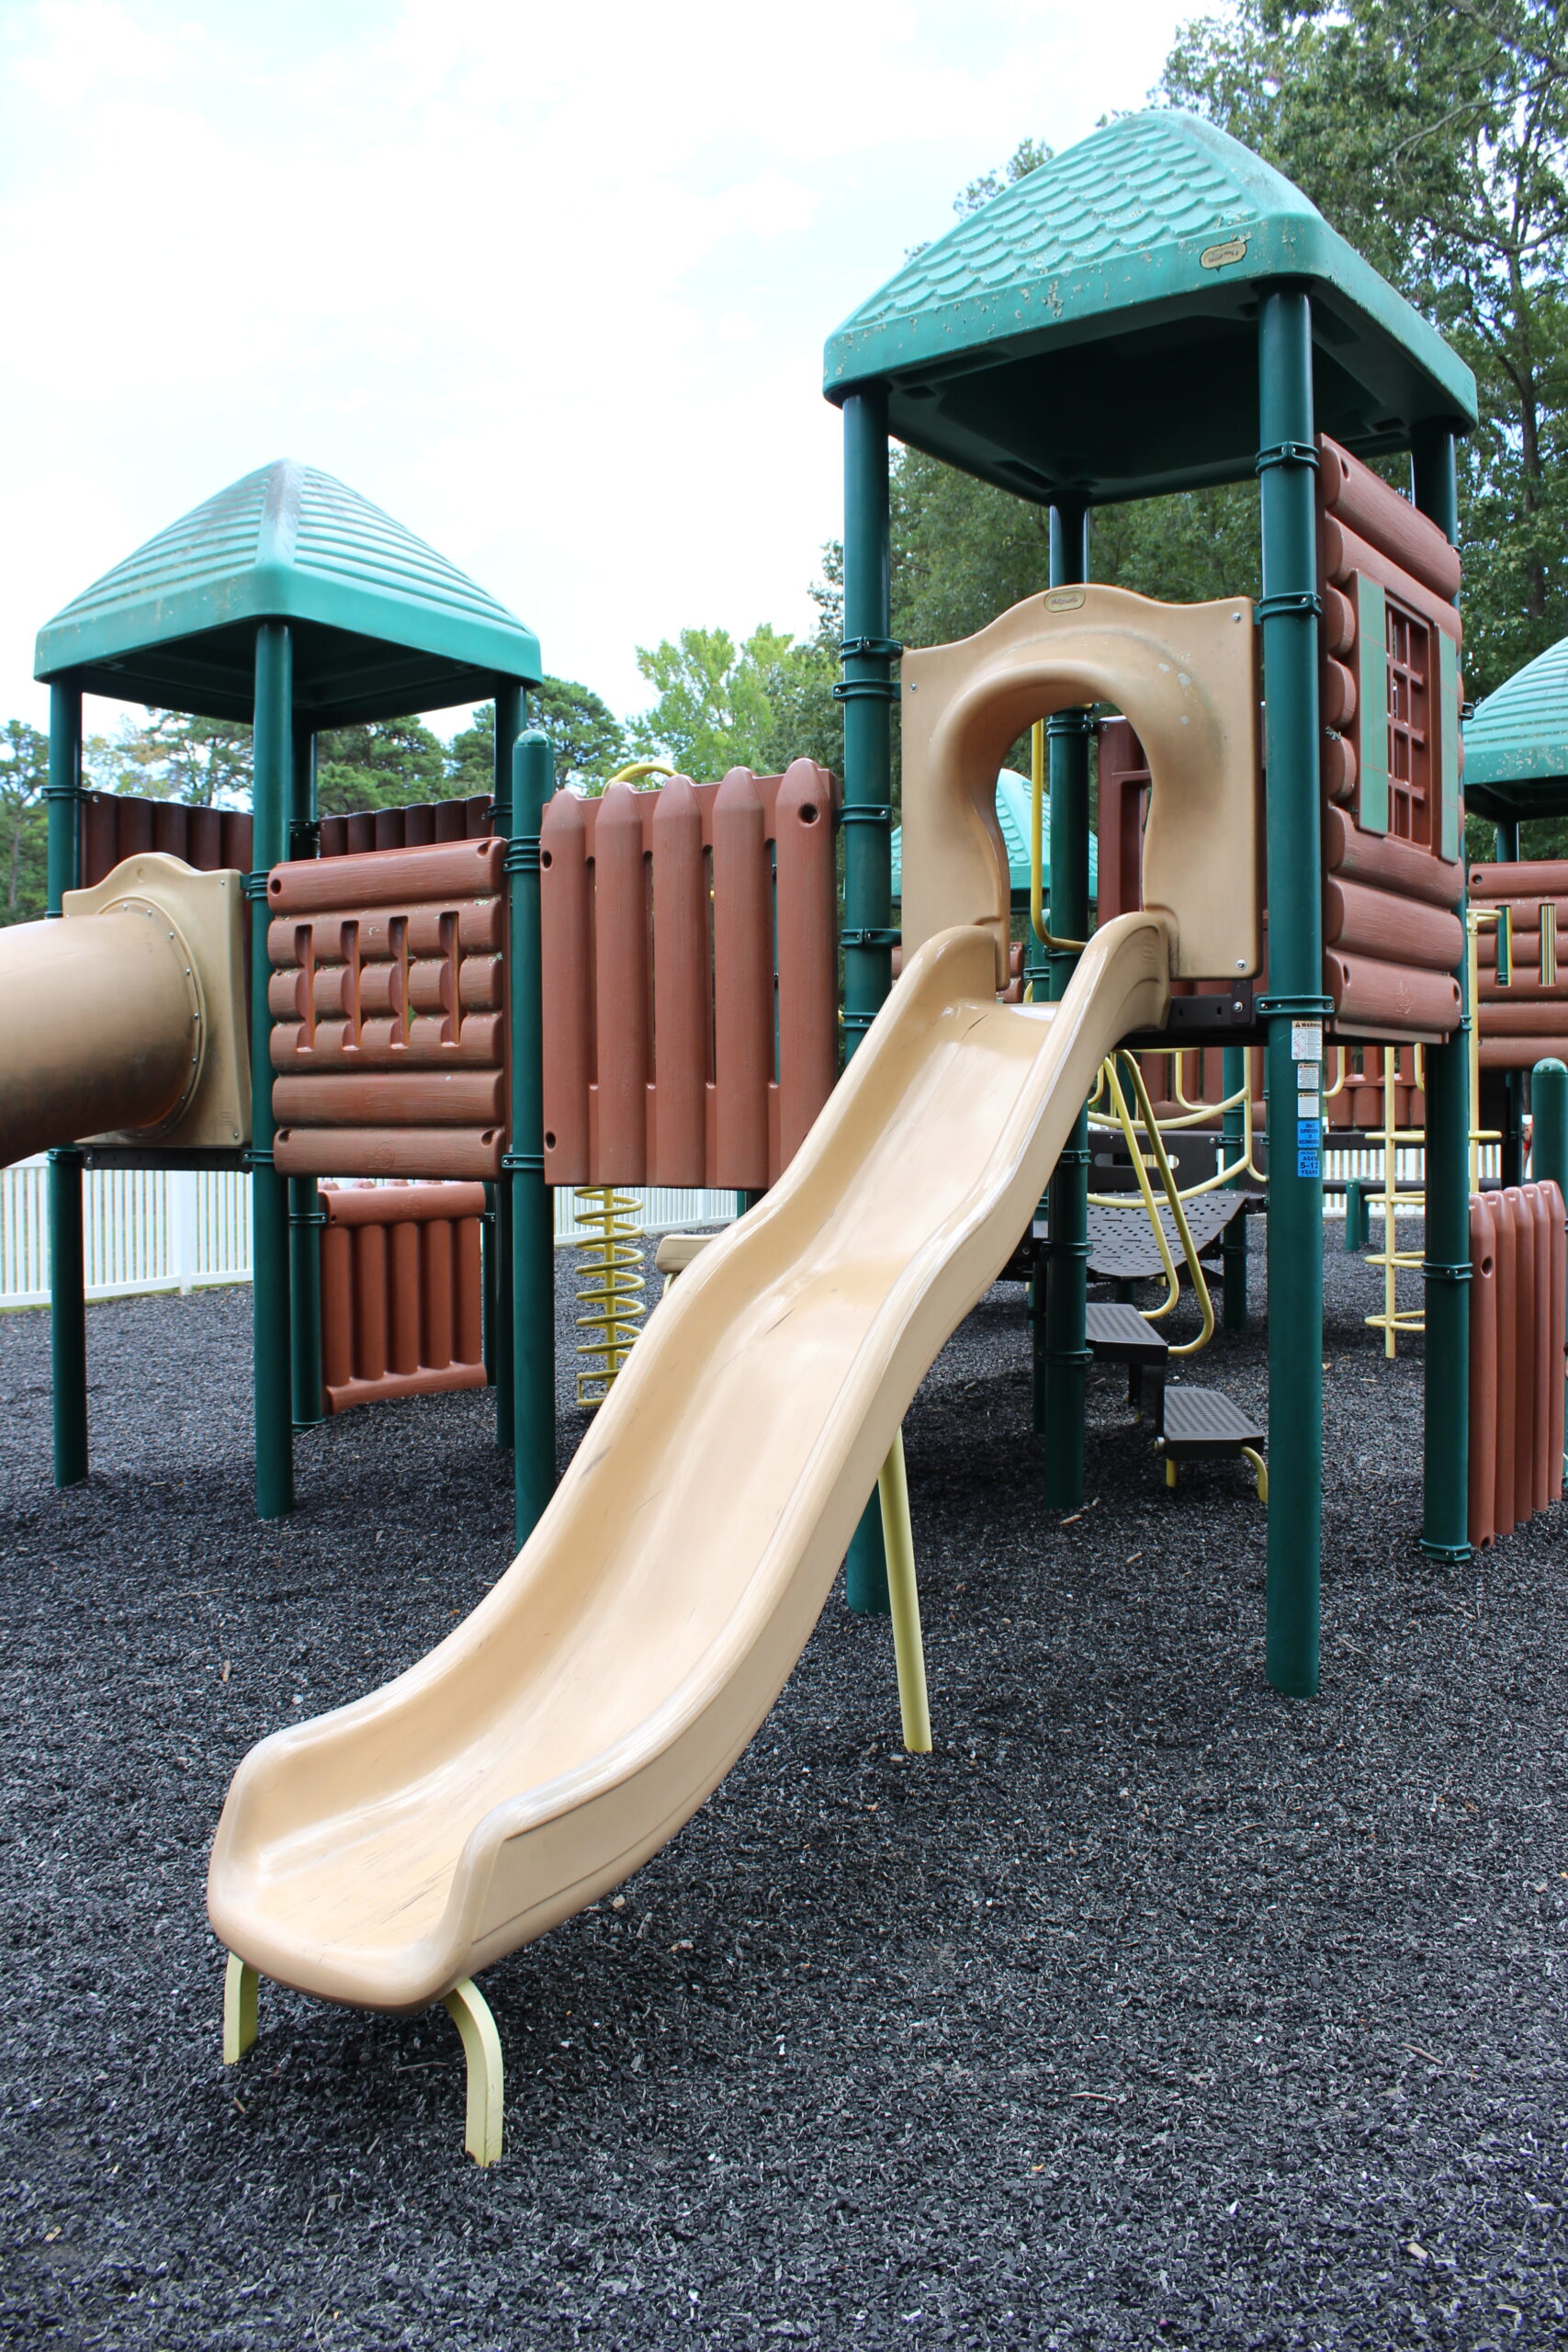 Front Estell Manor Park Playgrounds in Mays Landing NJ - SLIDES - open wavy slide on log cabin playground TALL image